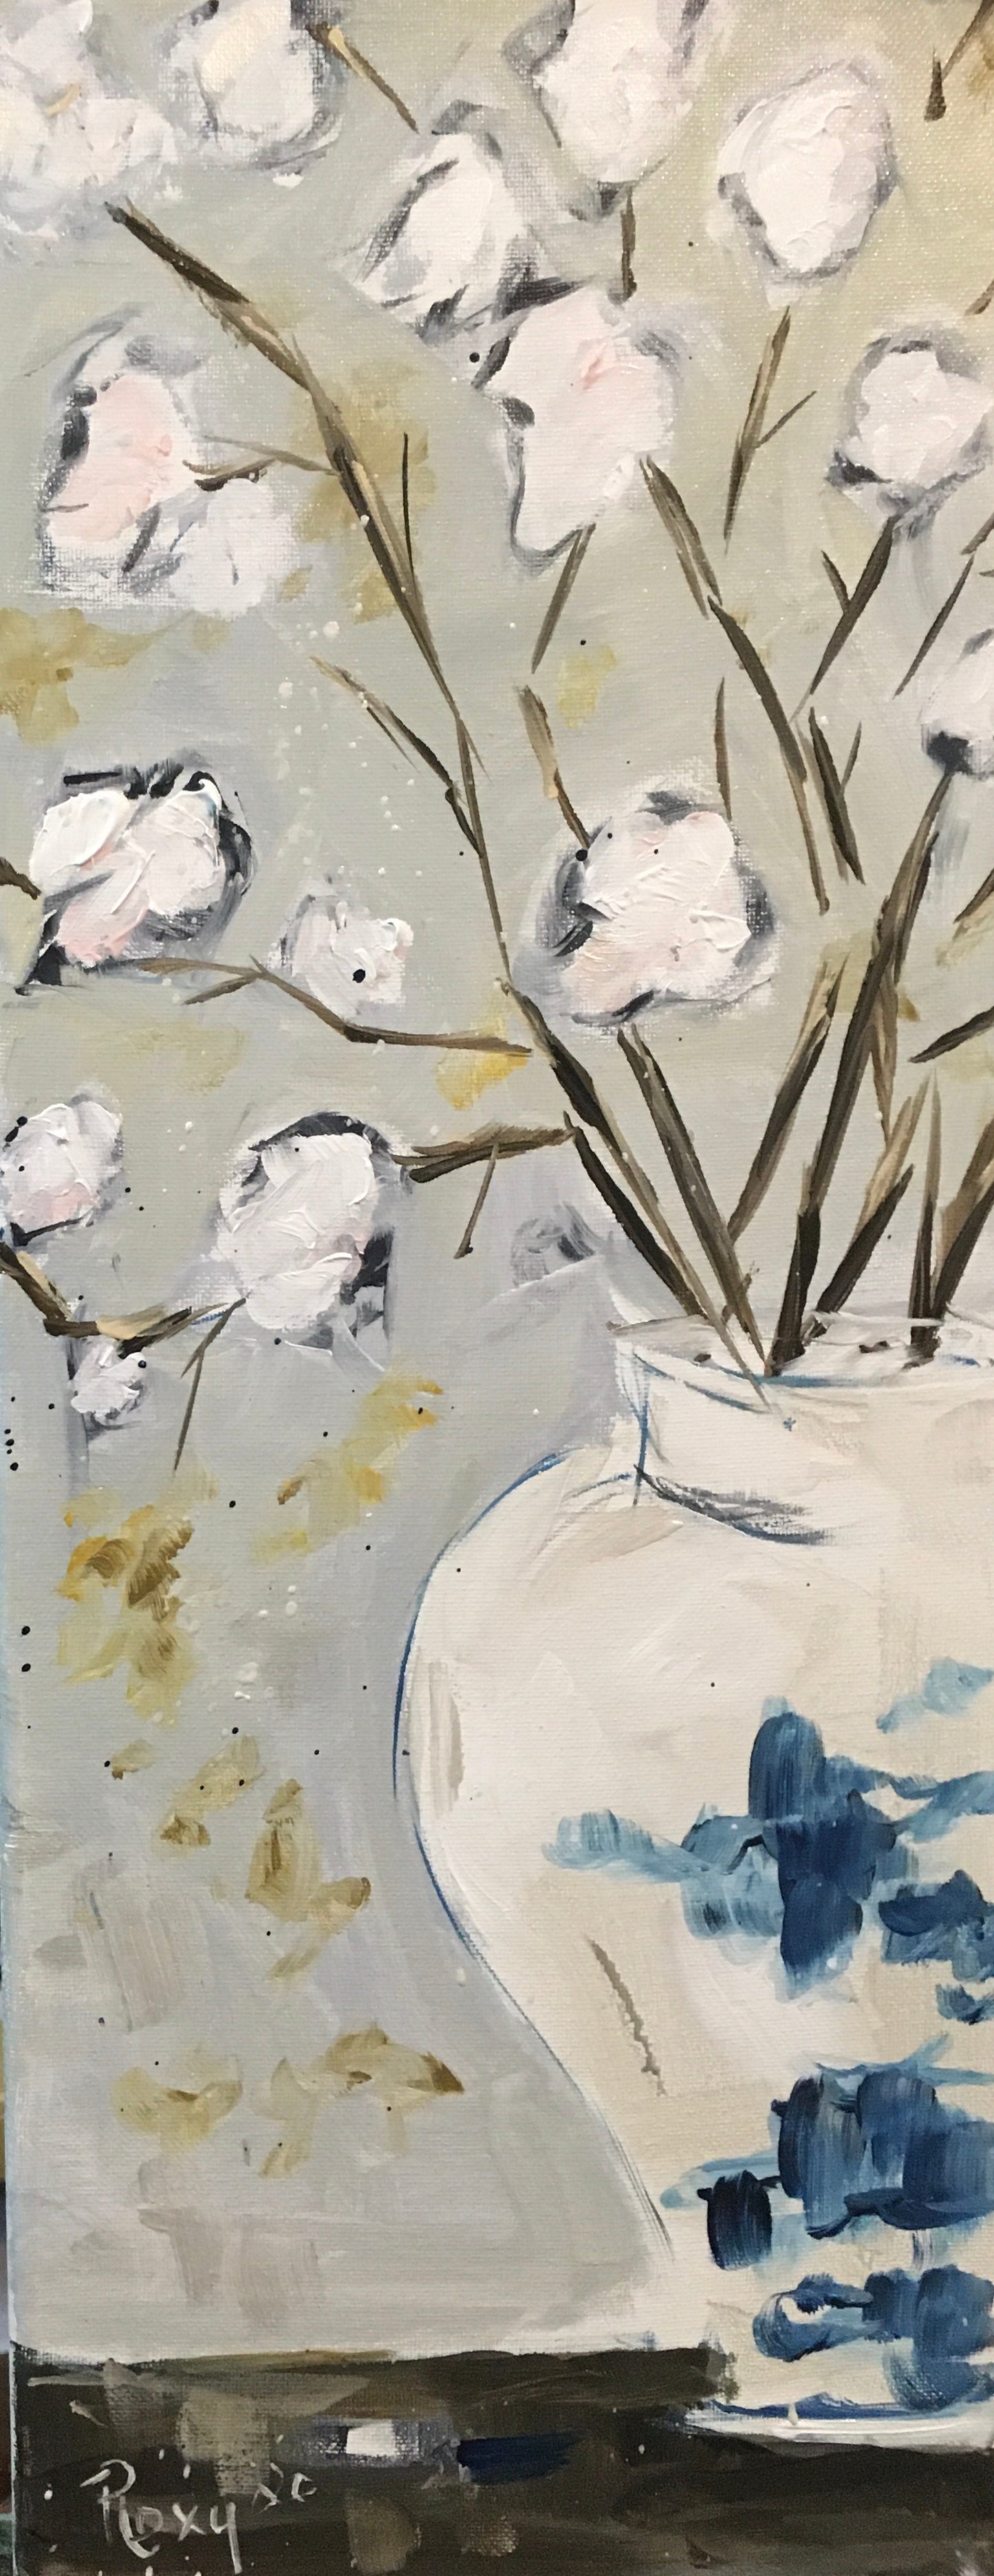 Cotton in a Ginger Jar Original Acrylic Painting Framed 8 x 20